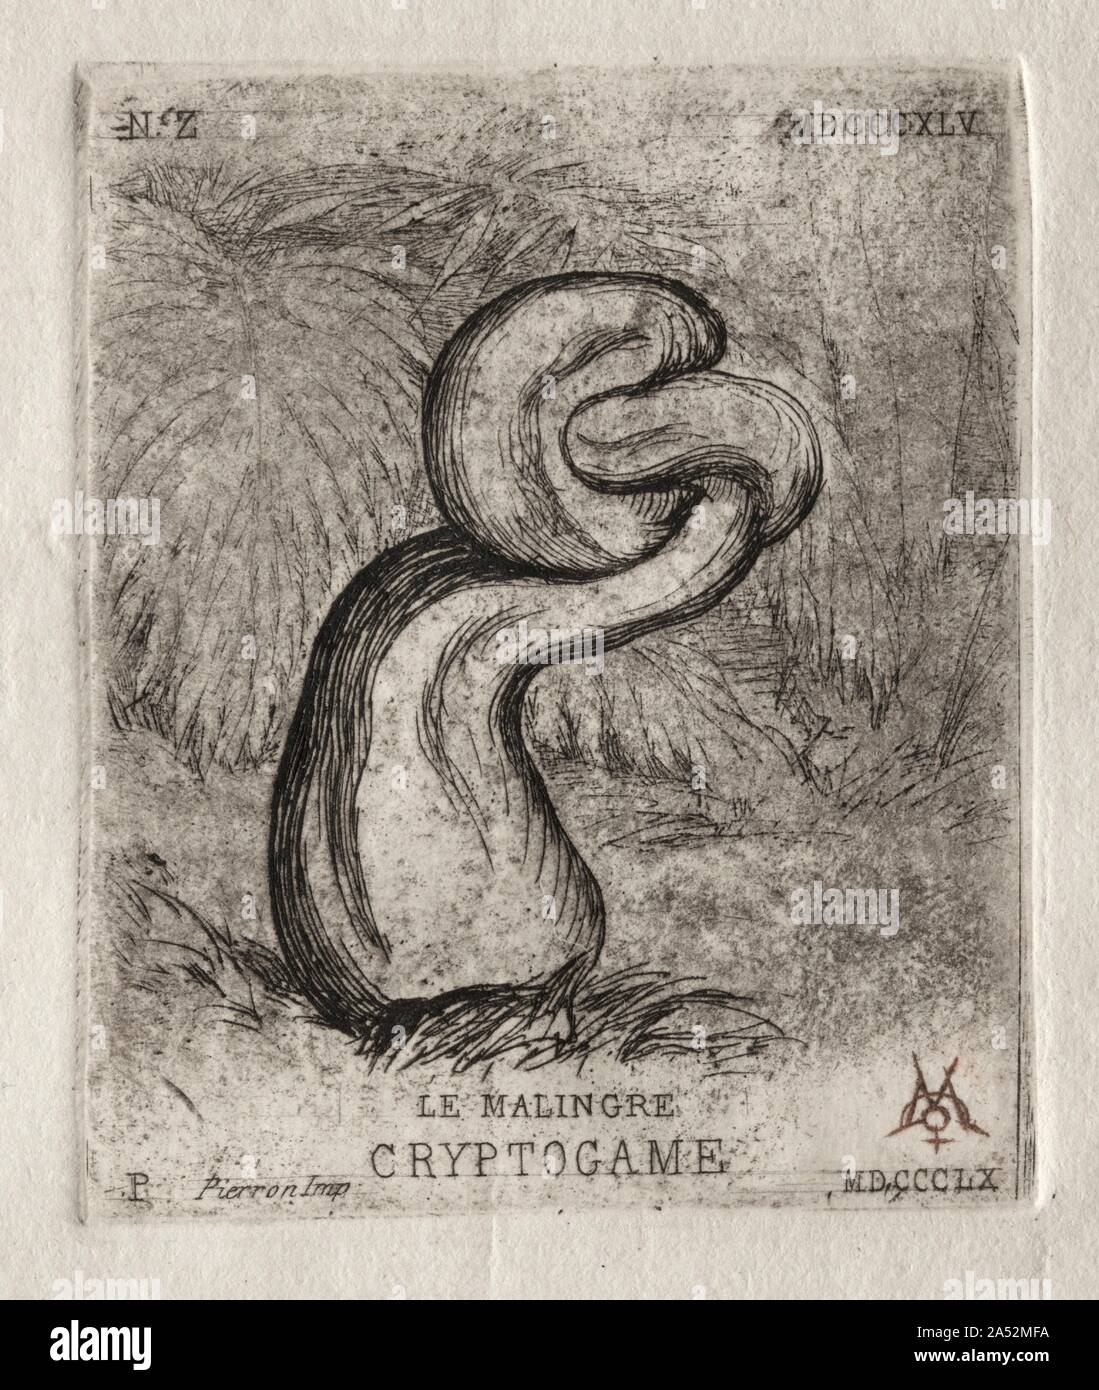 The Sickly Cryptogam, 1860. Stock Photo